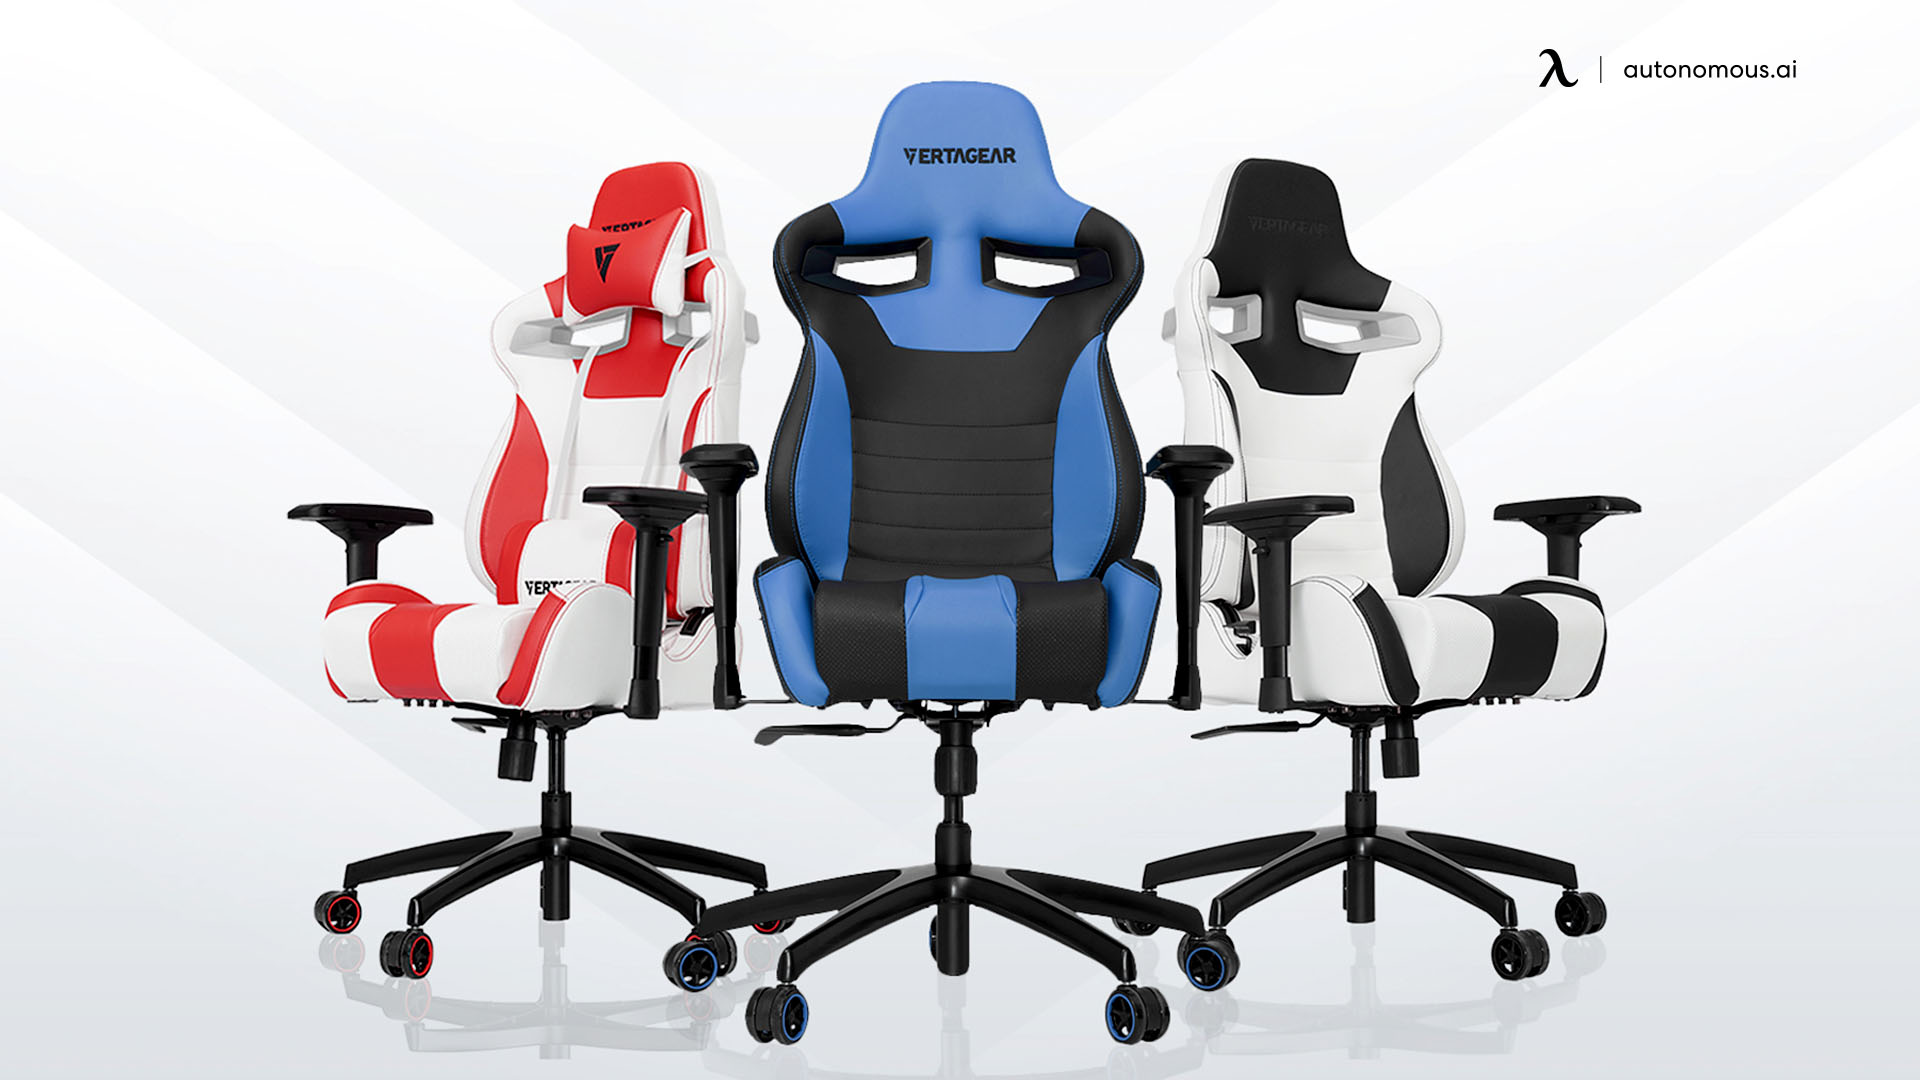 Vertagear SL4000 gaming chair for tall person